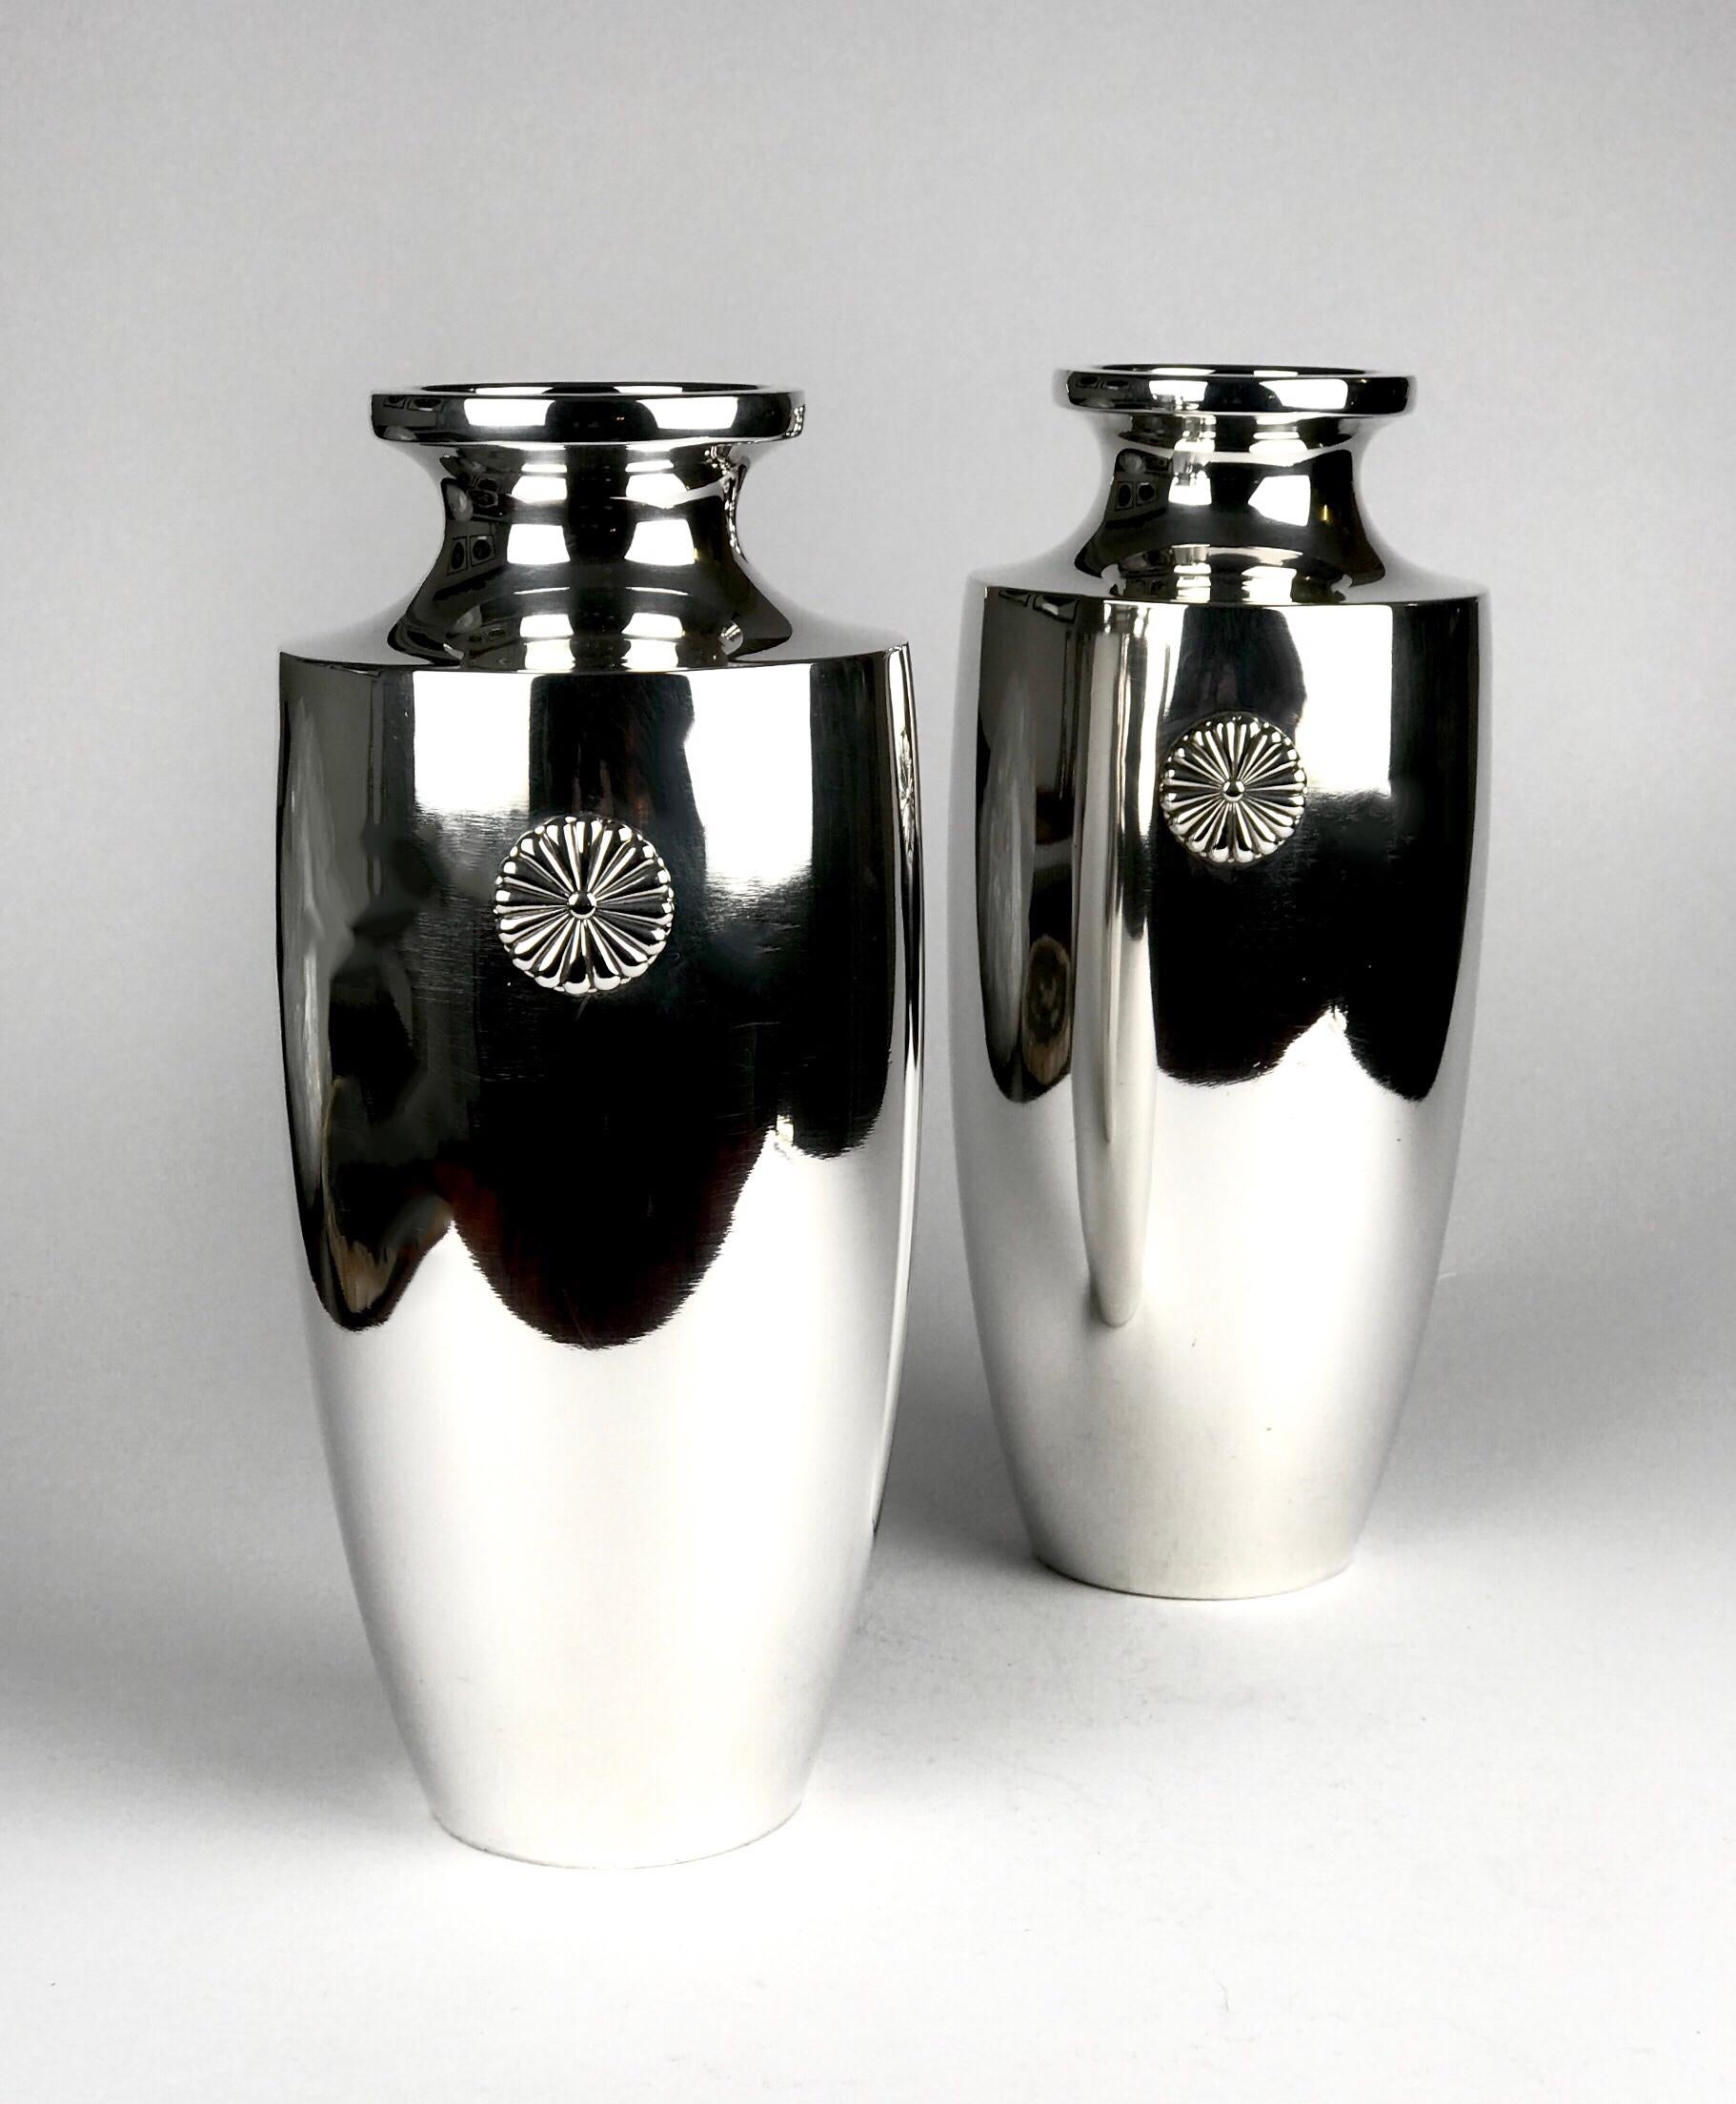 A rare and magnificent pair of Meiji period Japanese Emperor vase made in pure silver. These Pair of Imperial vases are made from pure silver and are marked to the base with the Jungian hallmark.
The single chrysanthemum flower with 18 petals is